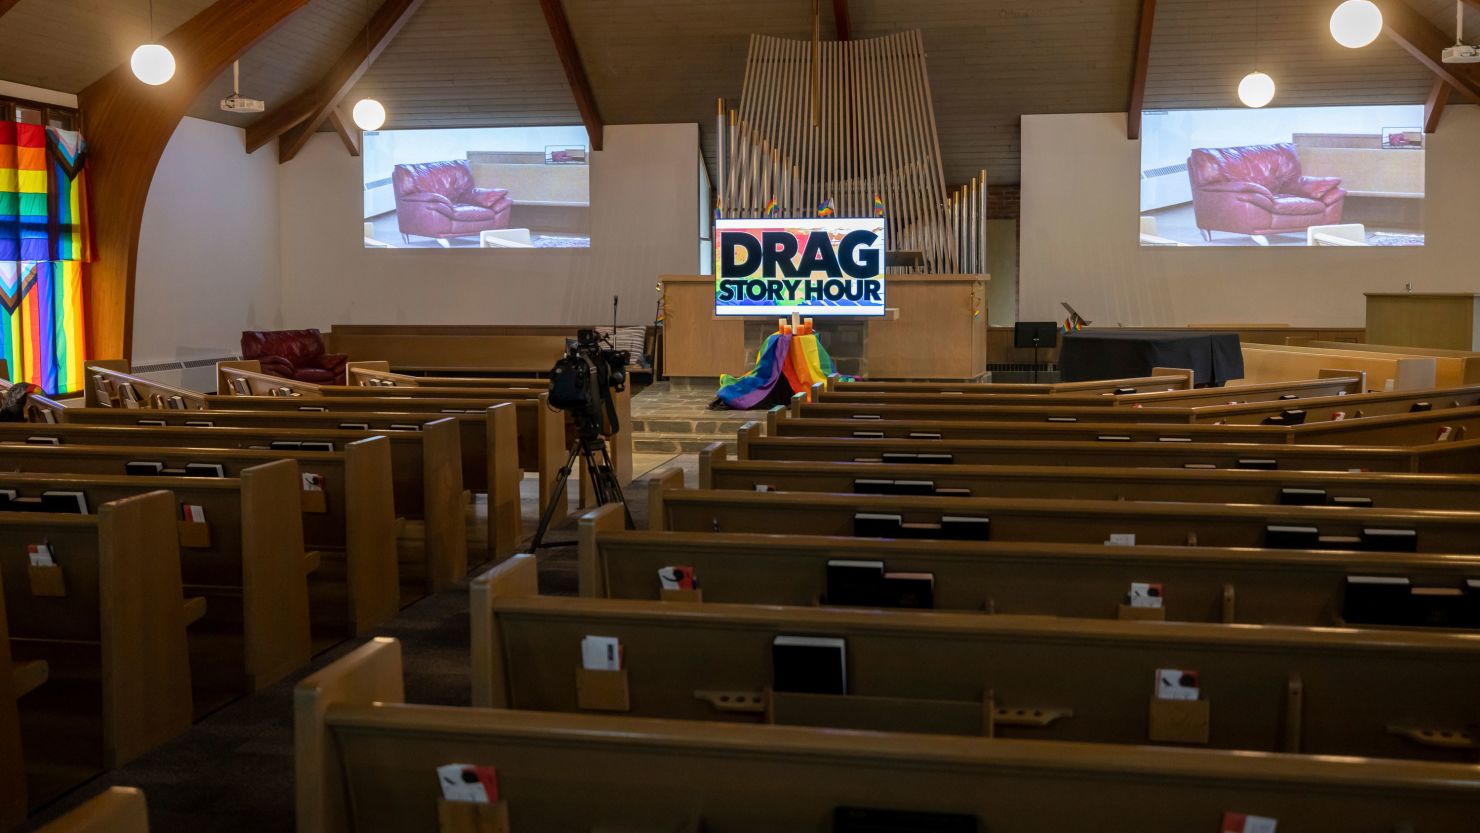 CHESTERLAND, OHIO - APRIL 1: Inside the empty Community Church of Chesterland, where Drag Queen Story Hour takes place on April 1, 2023 in Chesterland, Ohio. The heightened security at the church, which was reportedly firebombed a week prior to the event, comes on the heels of a recent spike of anti-drag demonstrations in Ohio communities and across the country.  (Photo by Michael Nigro/Sipa via AP Images)